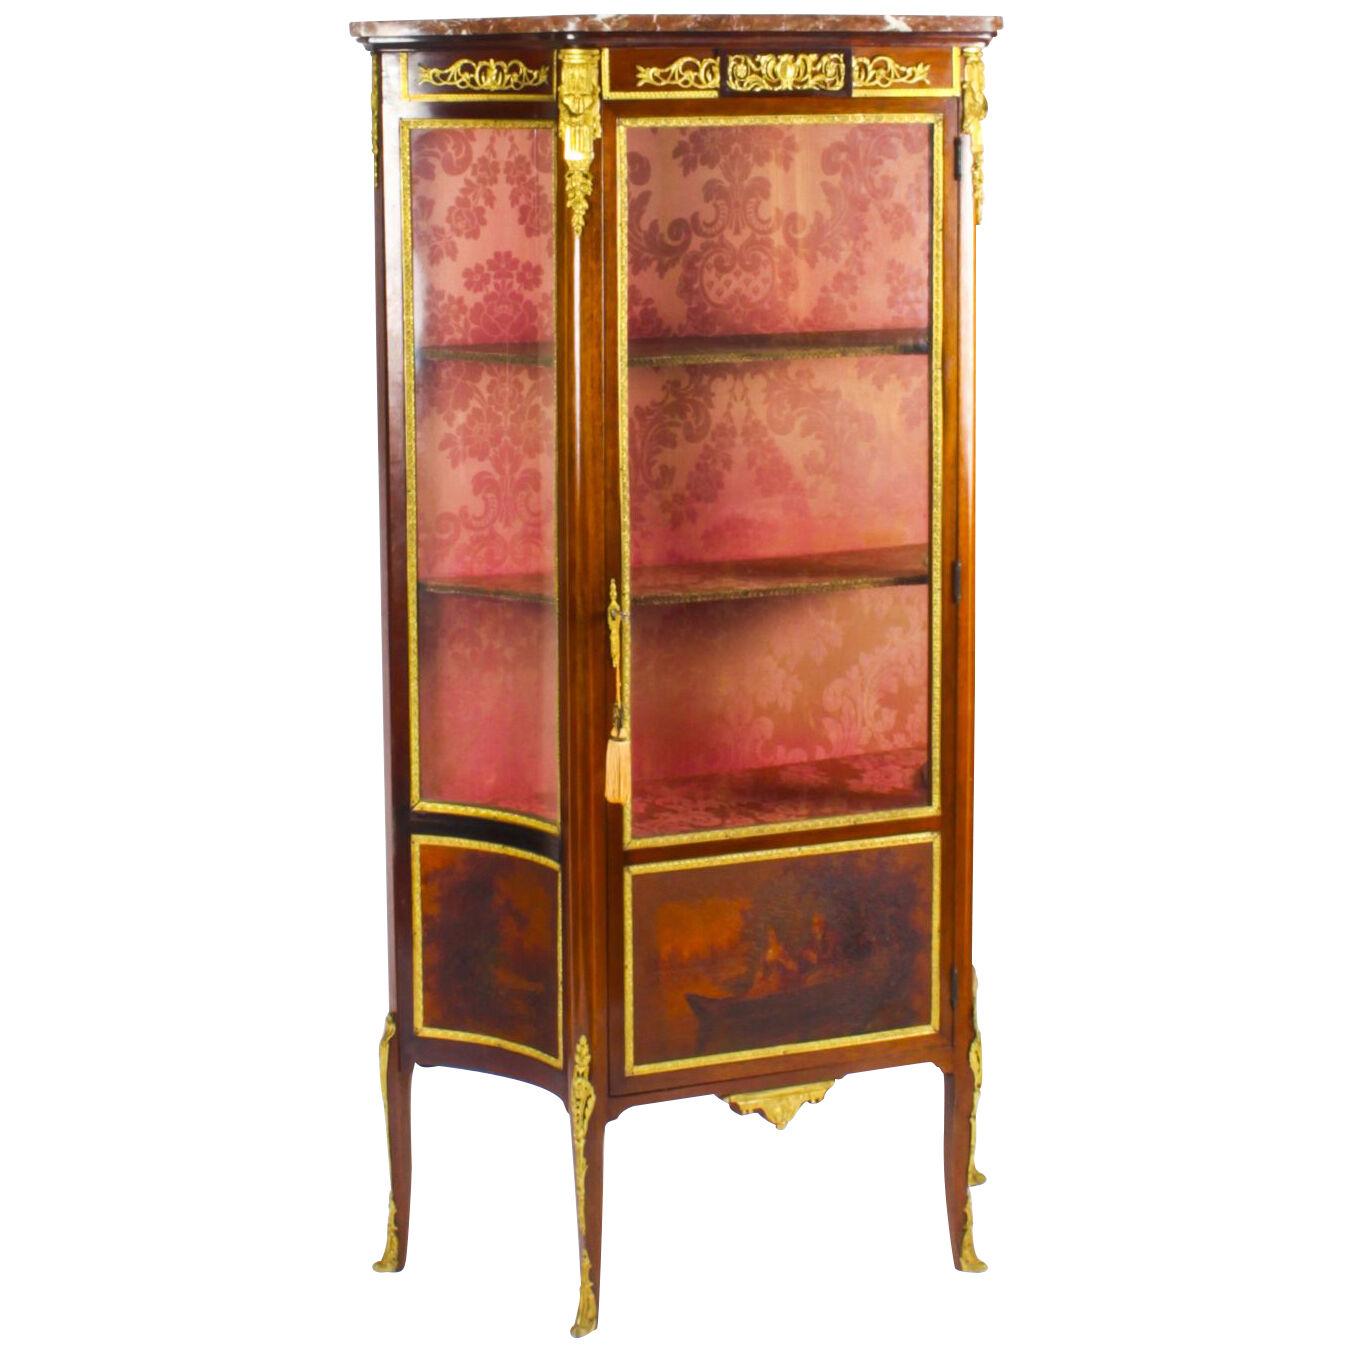 Antique French Vernis Martin Display Cabinet c.1880